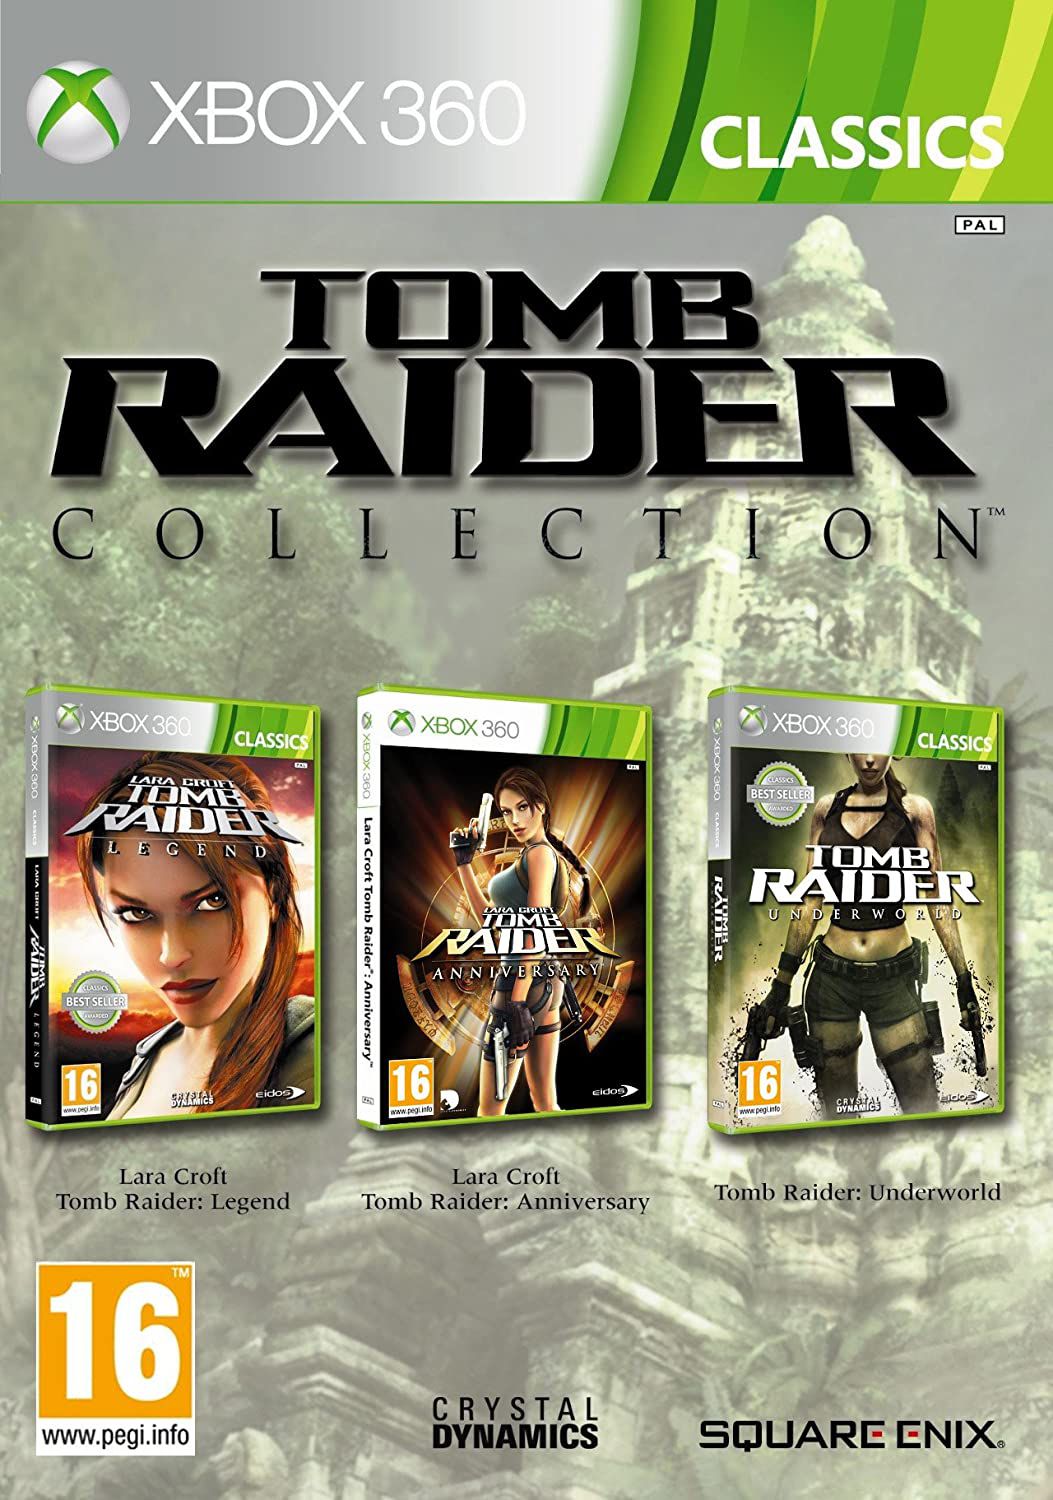 Ultimate Action Triple Pack (Tomb Raider/Just Cause 2/ Sleeping Dogs) -  Xbox 360 - BLUEWAVES GAMES